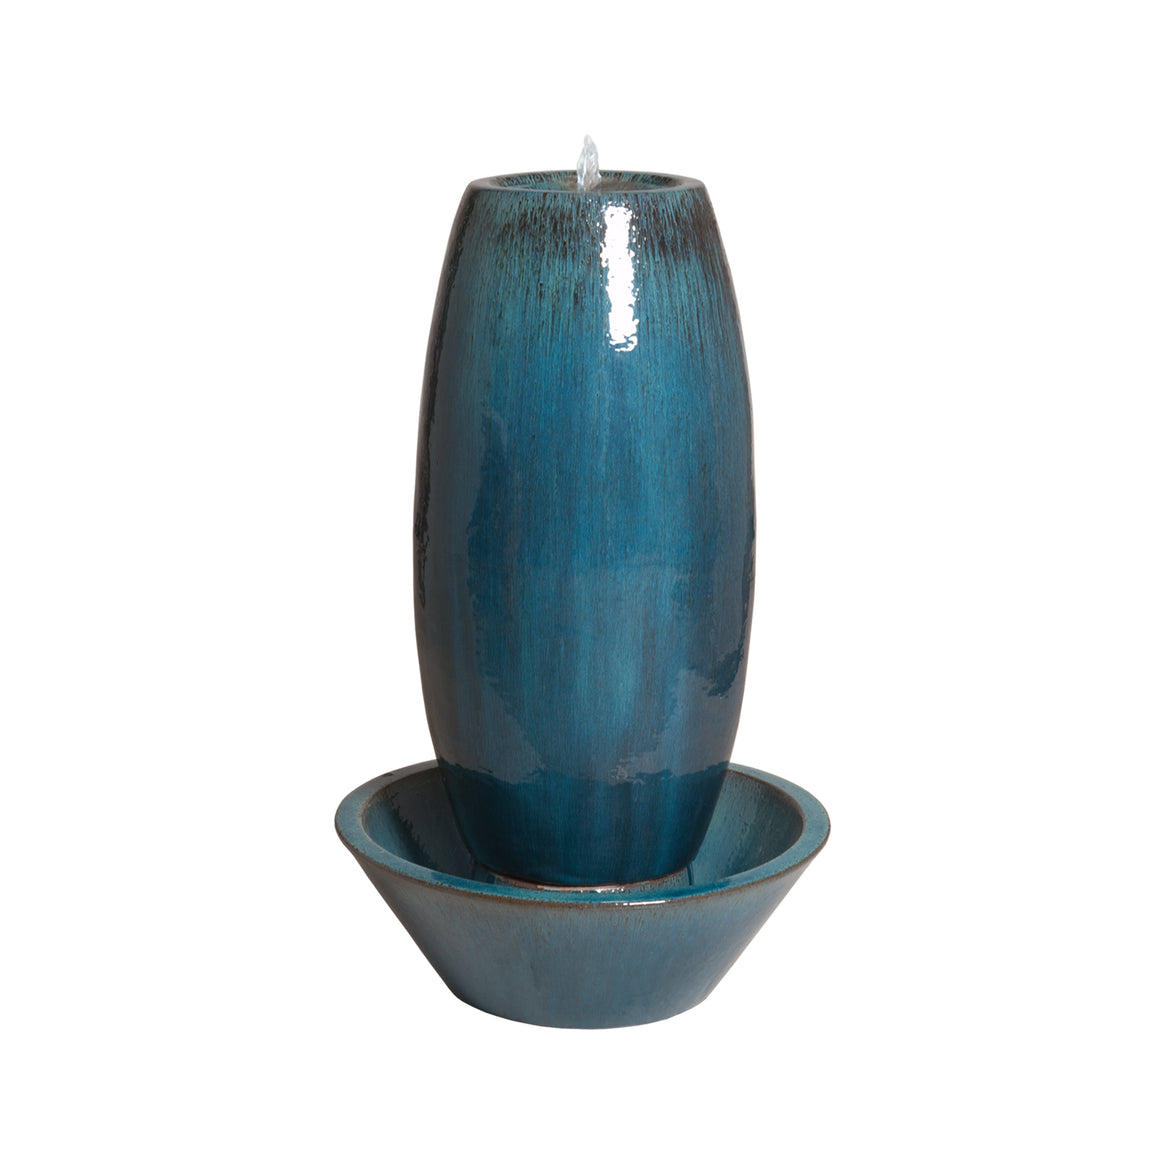 Fountain with a Blue Glaze (2 Pieces with Pump Included)